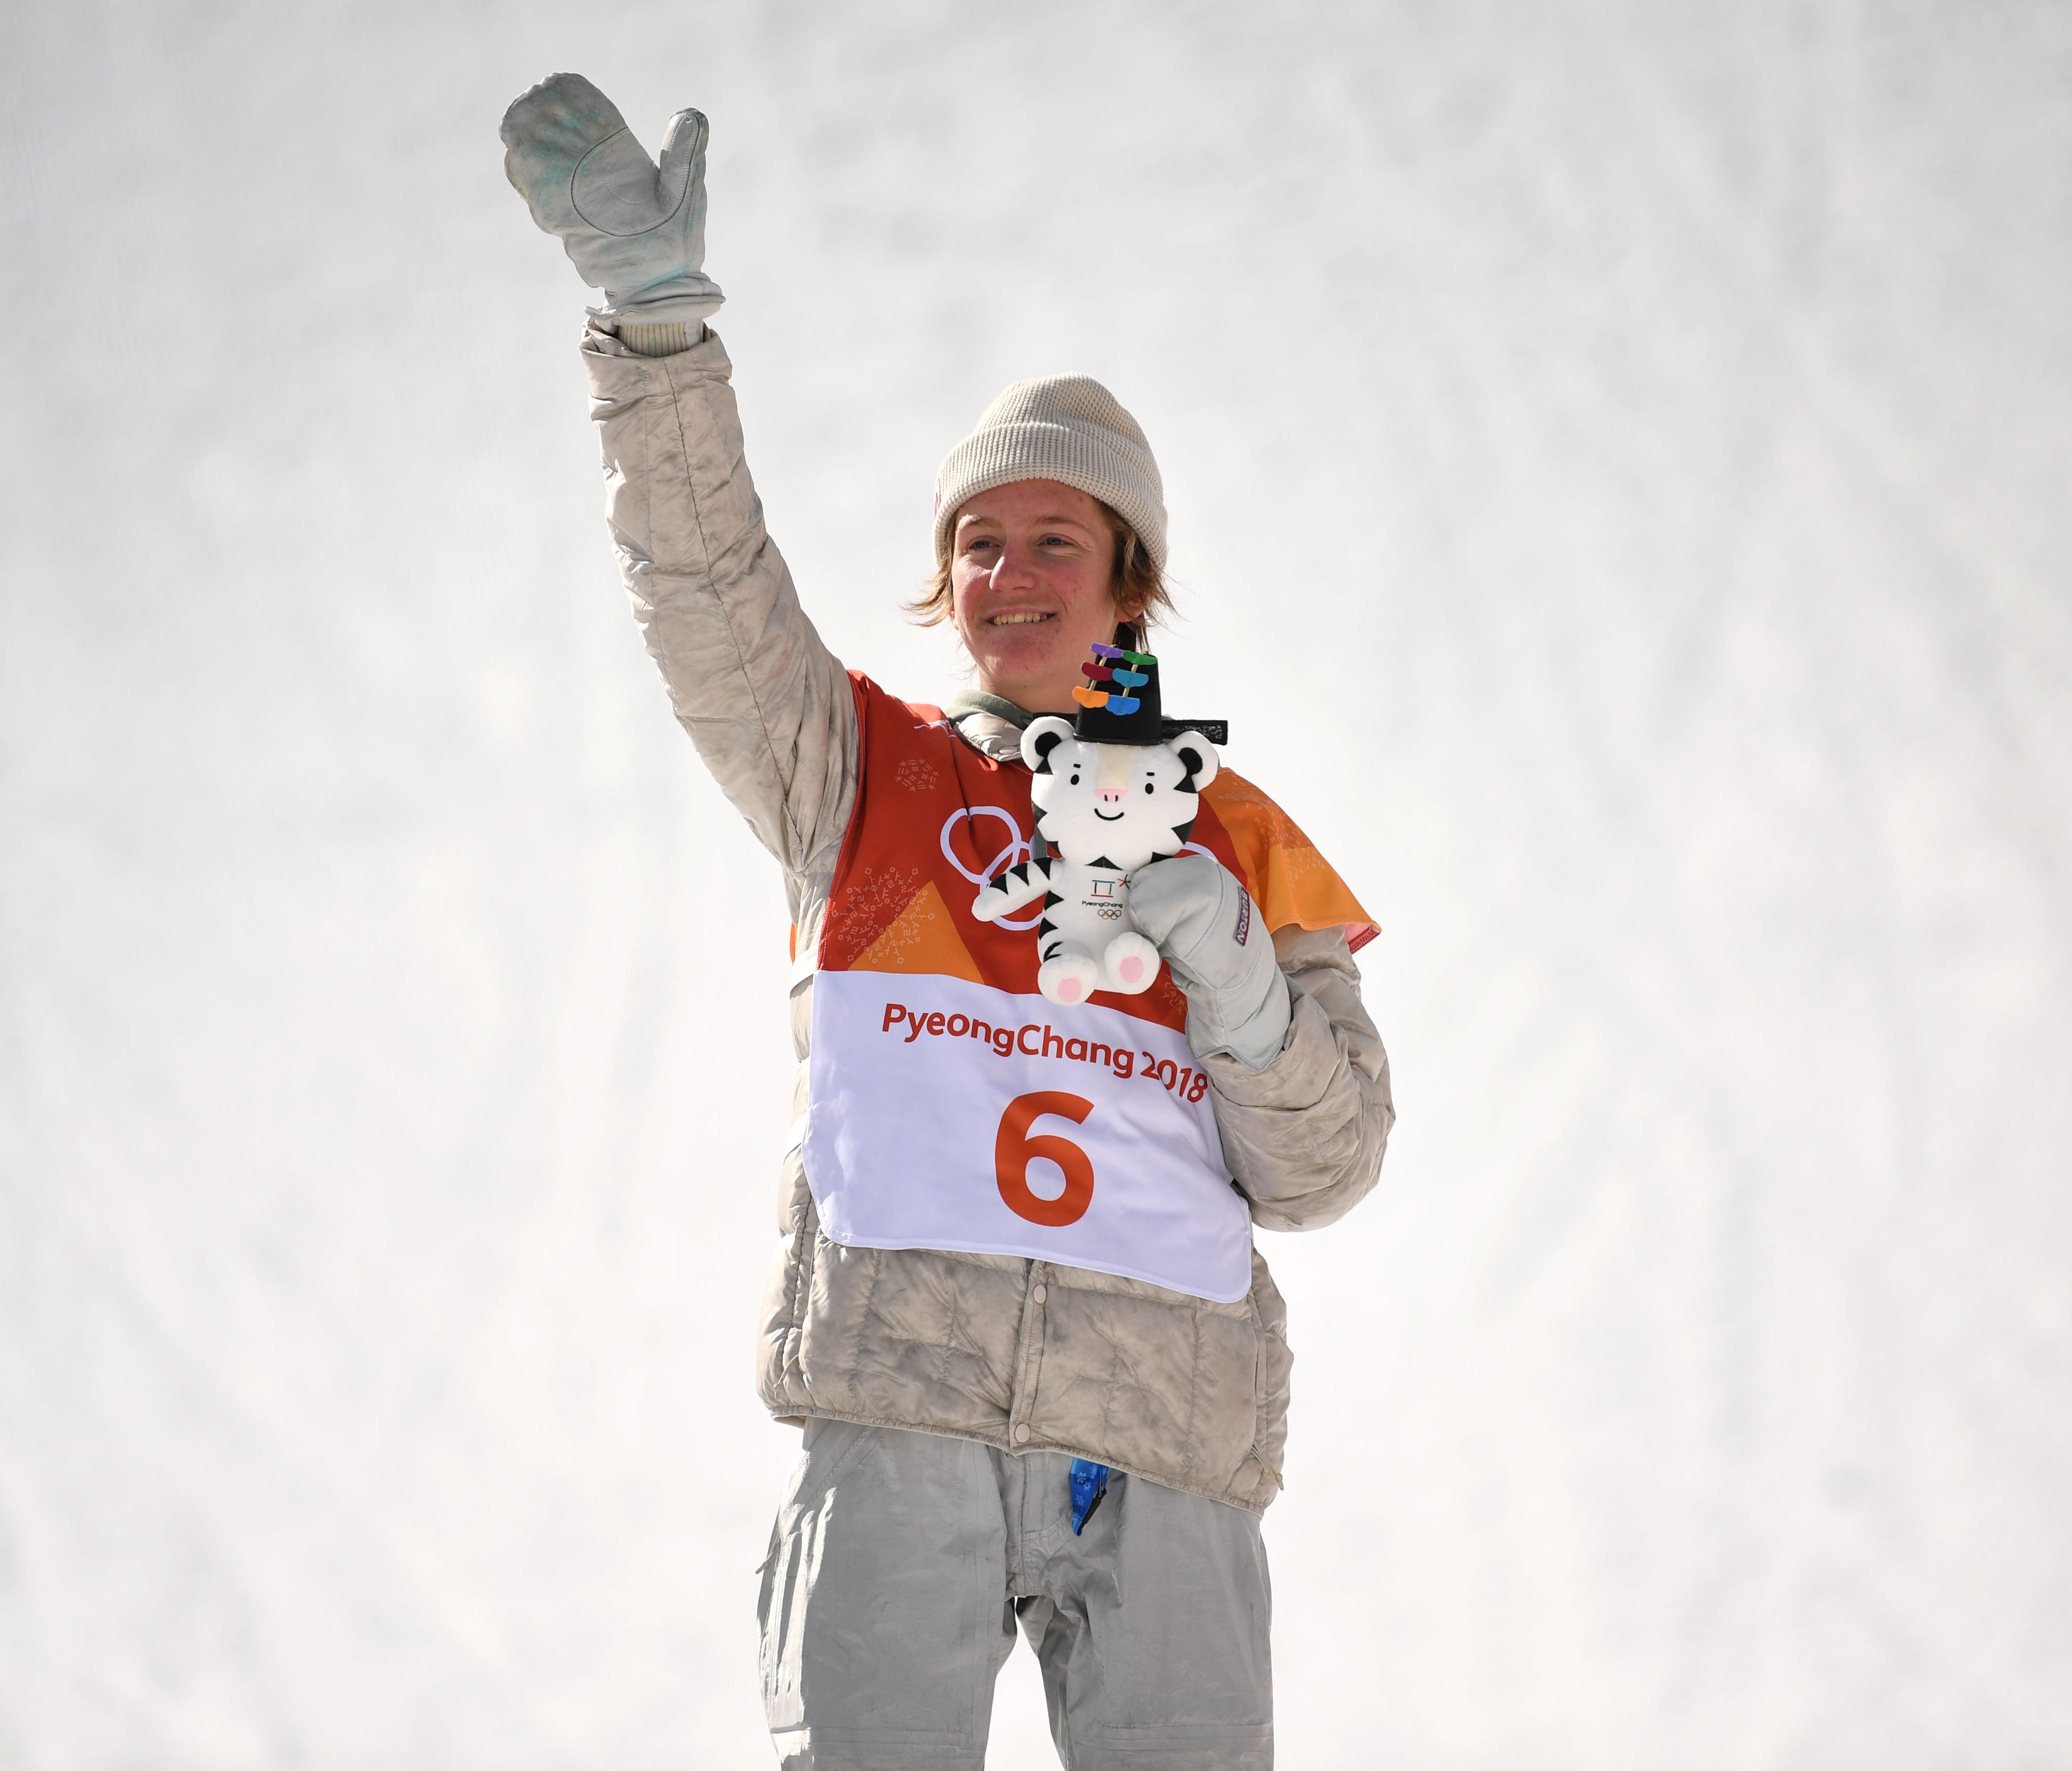 Red Gerard reacts after winning goldl in snowboard slopestyle during the Pyeongchang 2018 Olympic Winter Games at Phoenix Snow Park on Feb. 11.